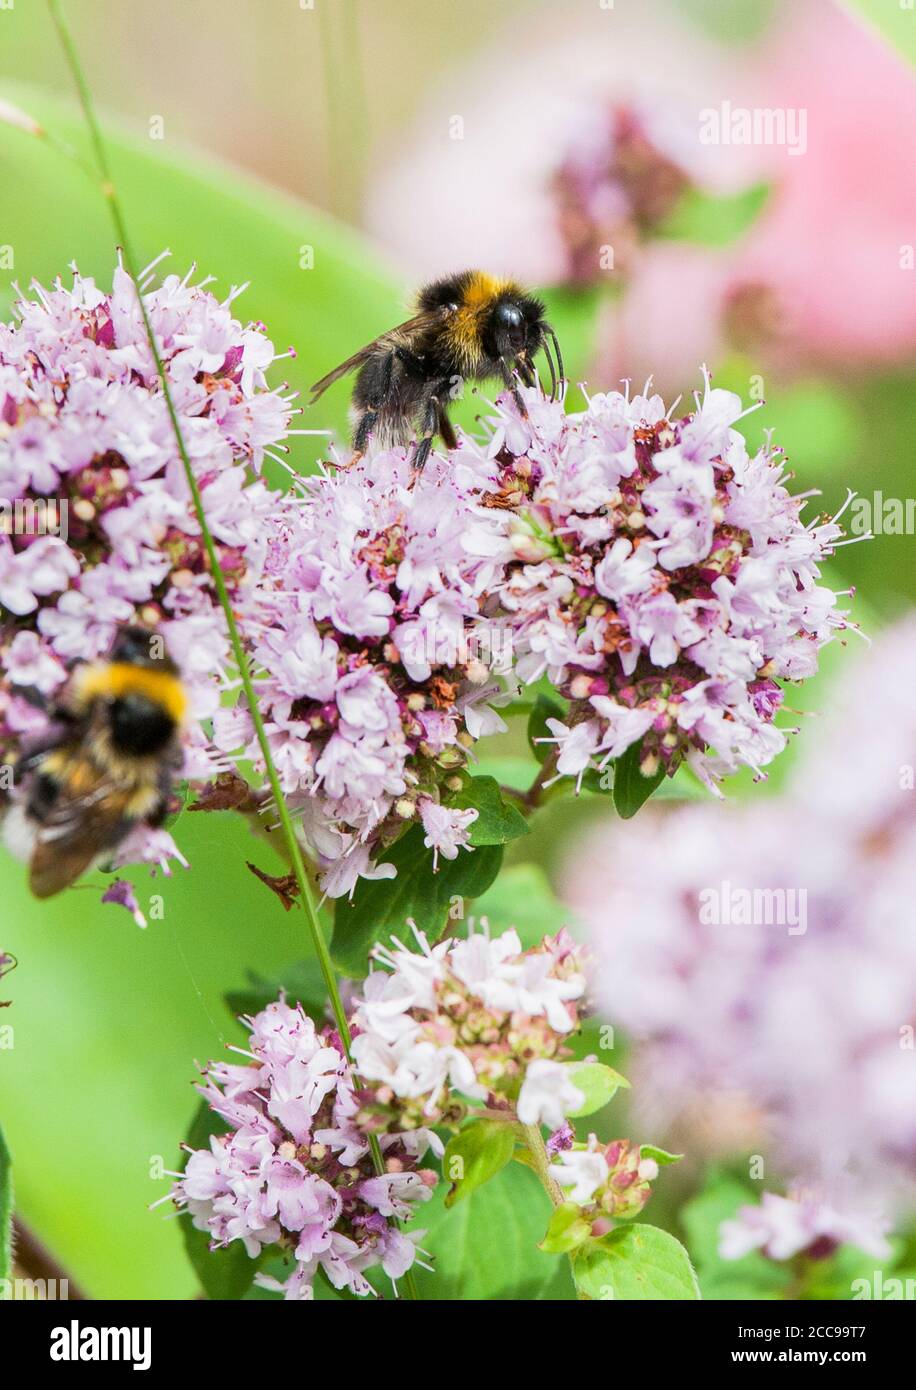 BUMBLEBEE on Oregano flower searching for nectar or pollen Stock Photo